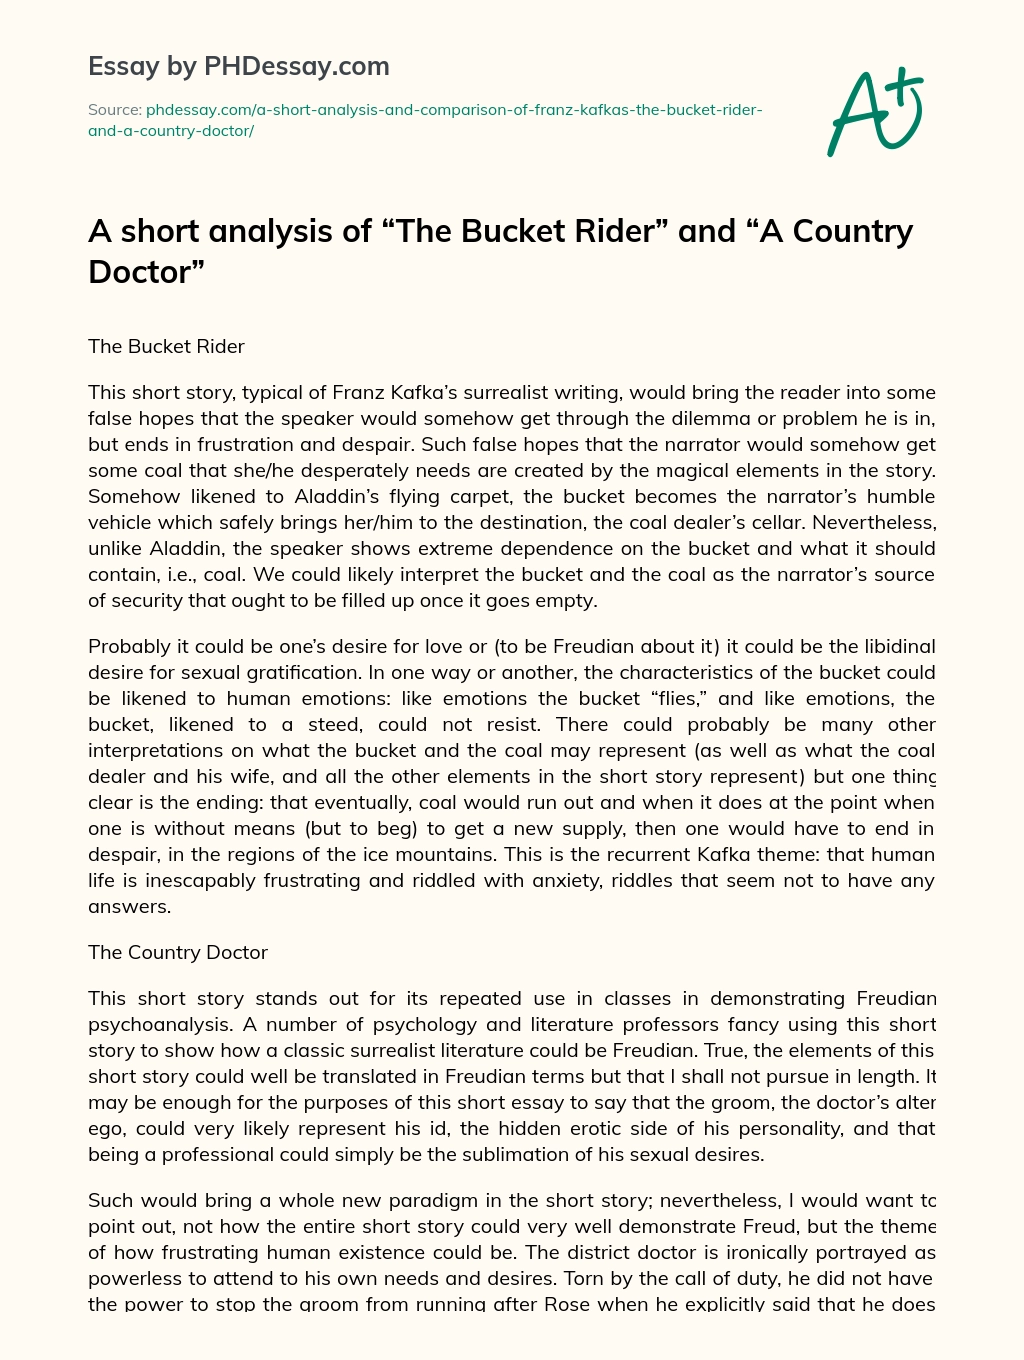 A short analysis of “The Bucket Rider” and “A Country Doctor” essay